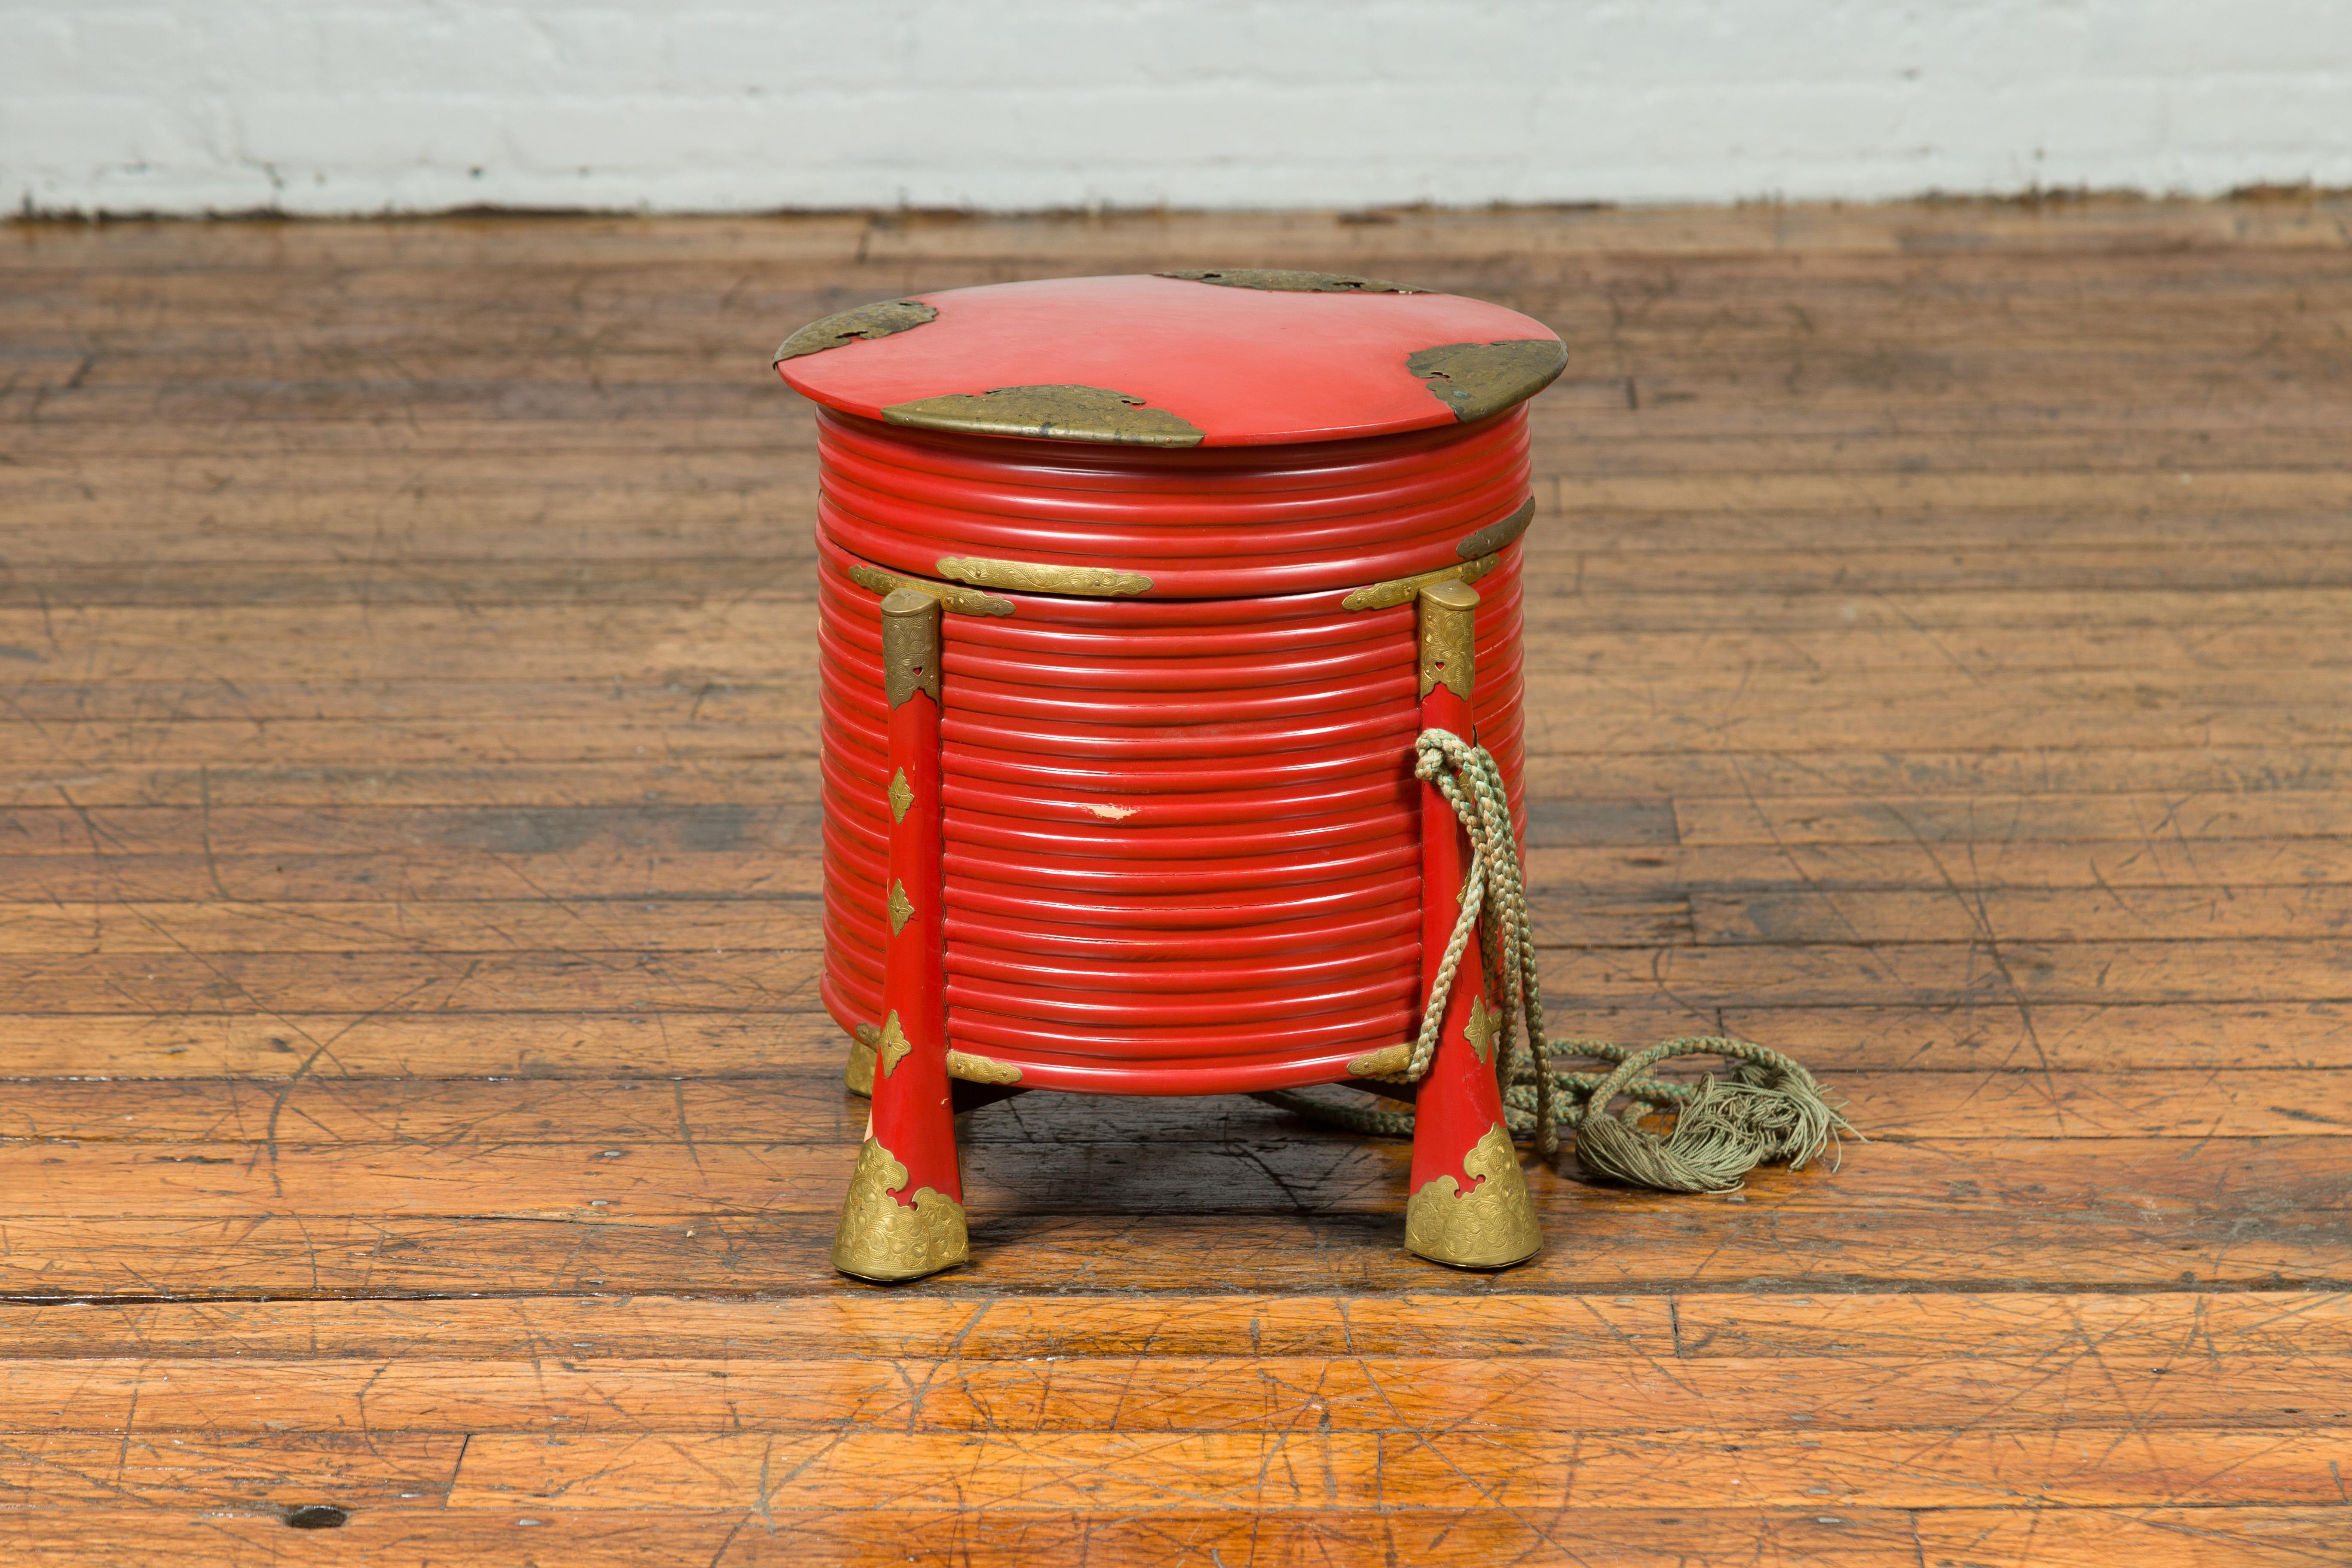 A Japanese Taisho period Hokai box from the early 20th century, with red lacquer, ornate brass accents and original rope. This vibrant Japanese Taisho period Hokai box, crafted in the early 20th century, exudes both historical charm and functional